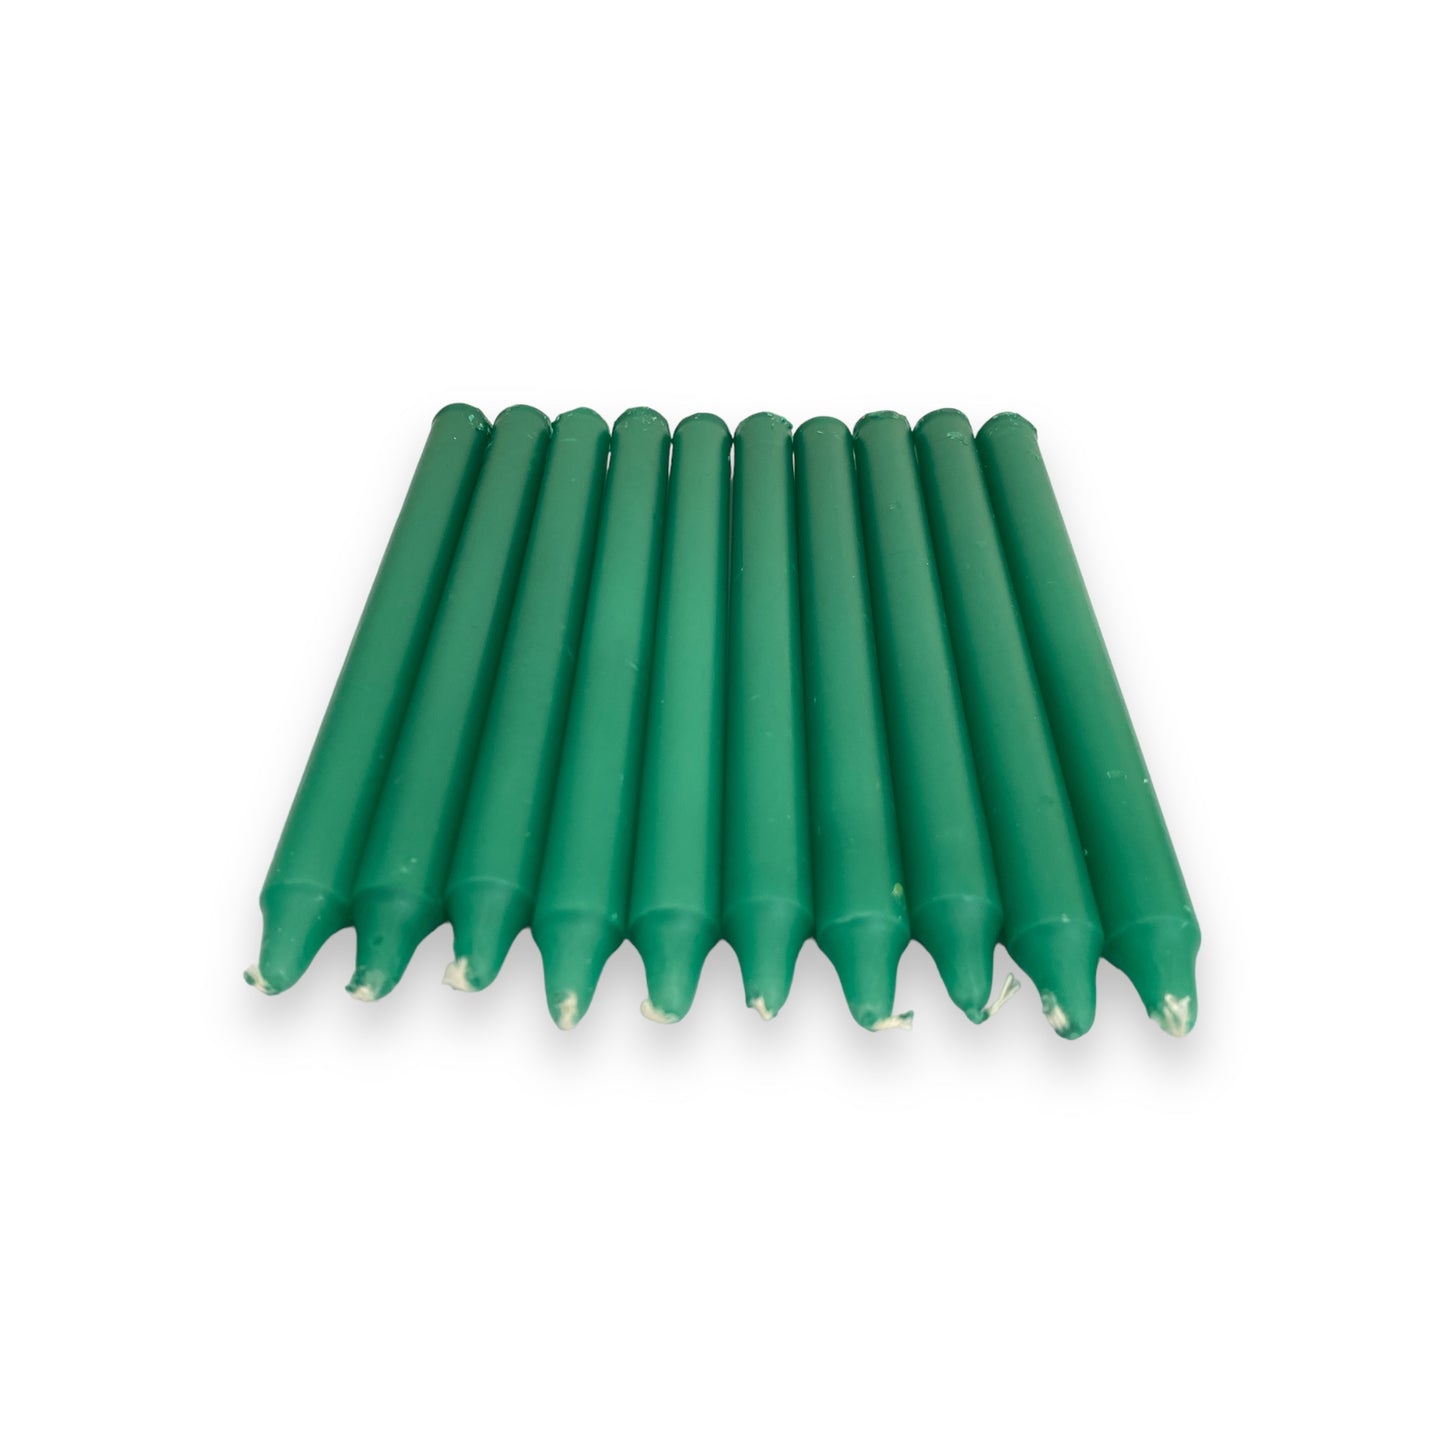 Pack of Green Candles - 17cm